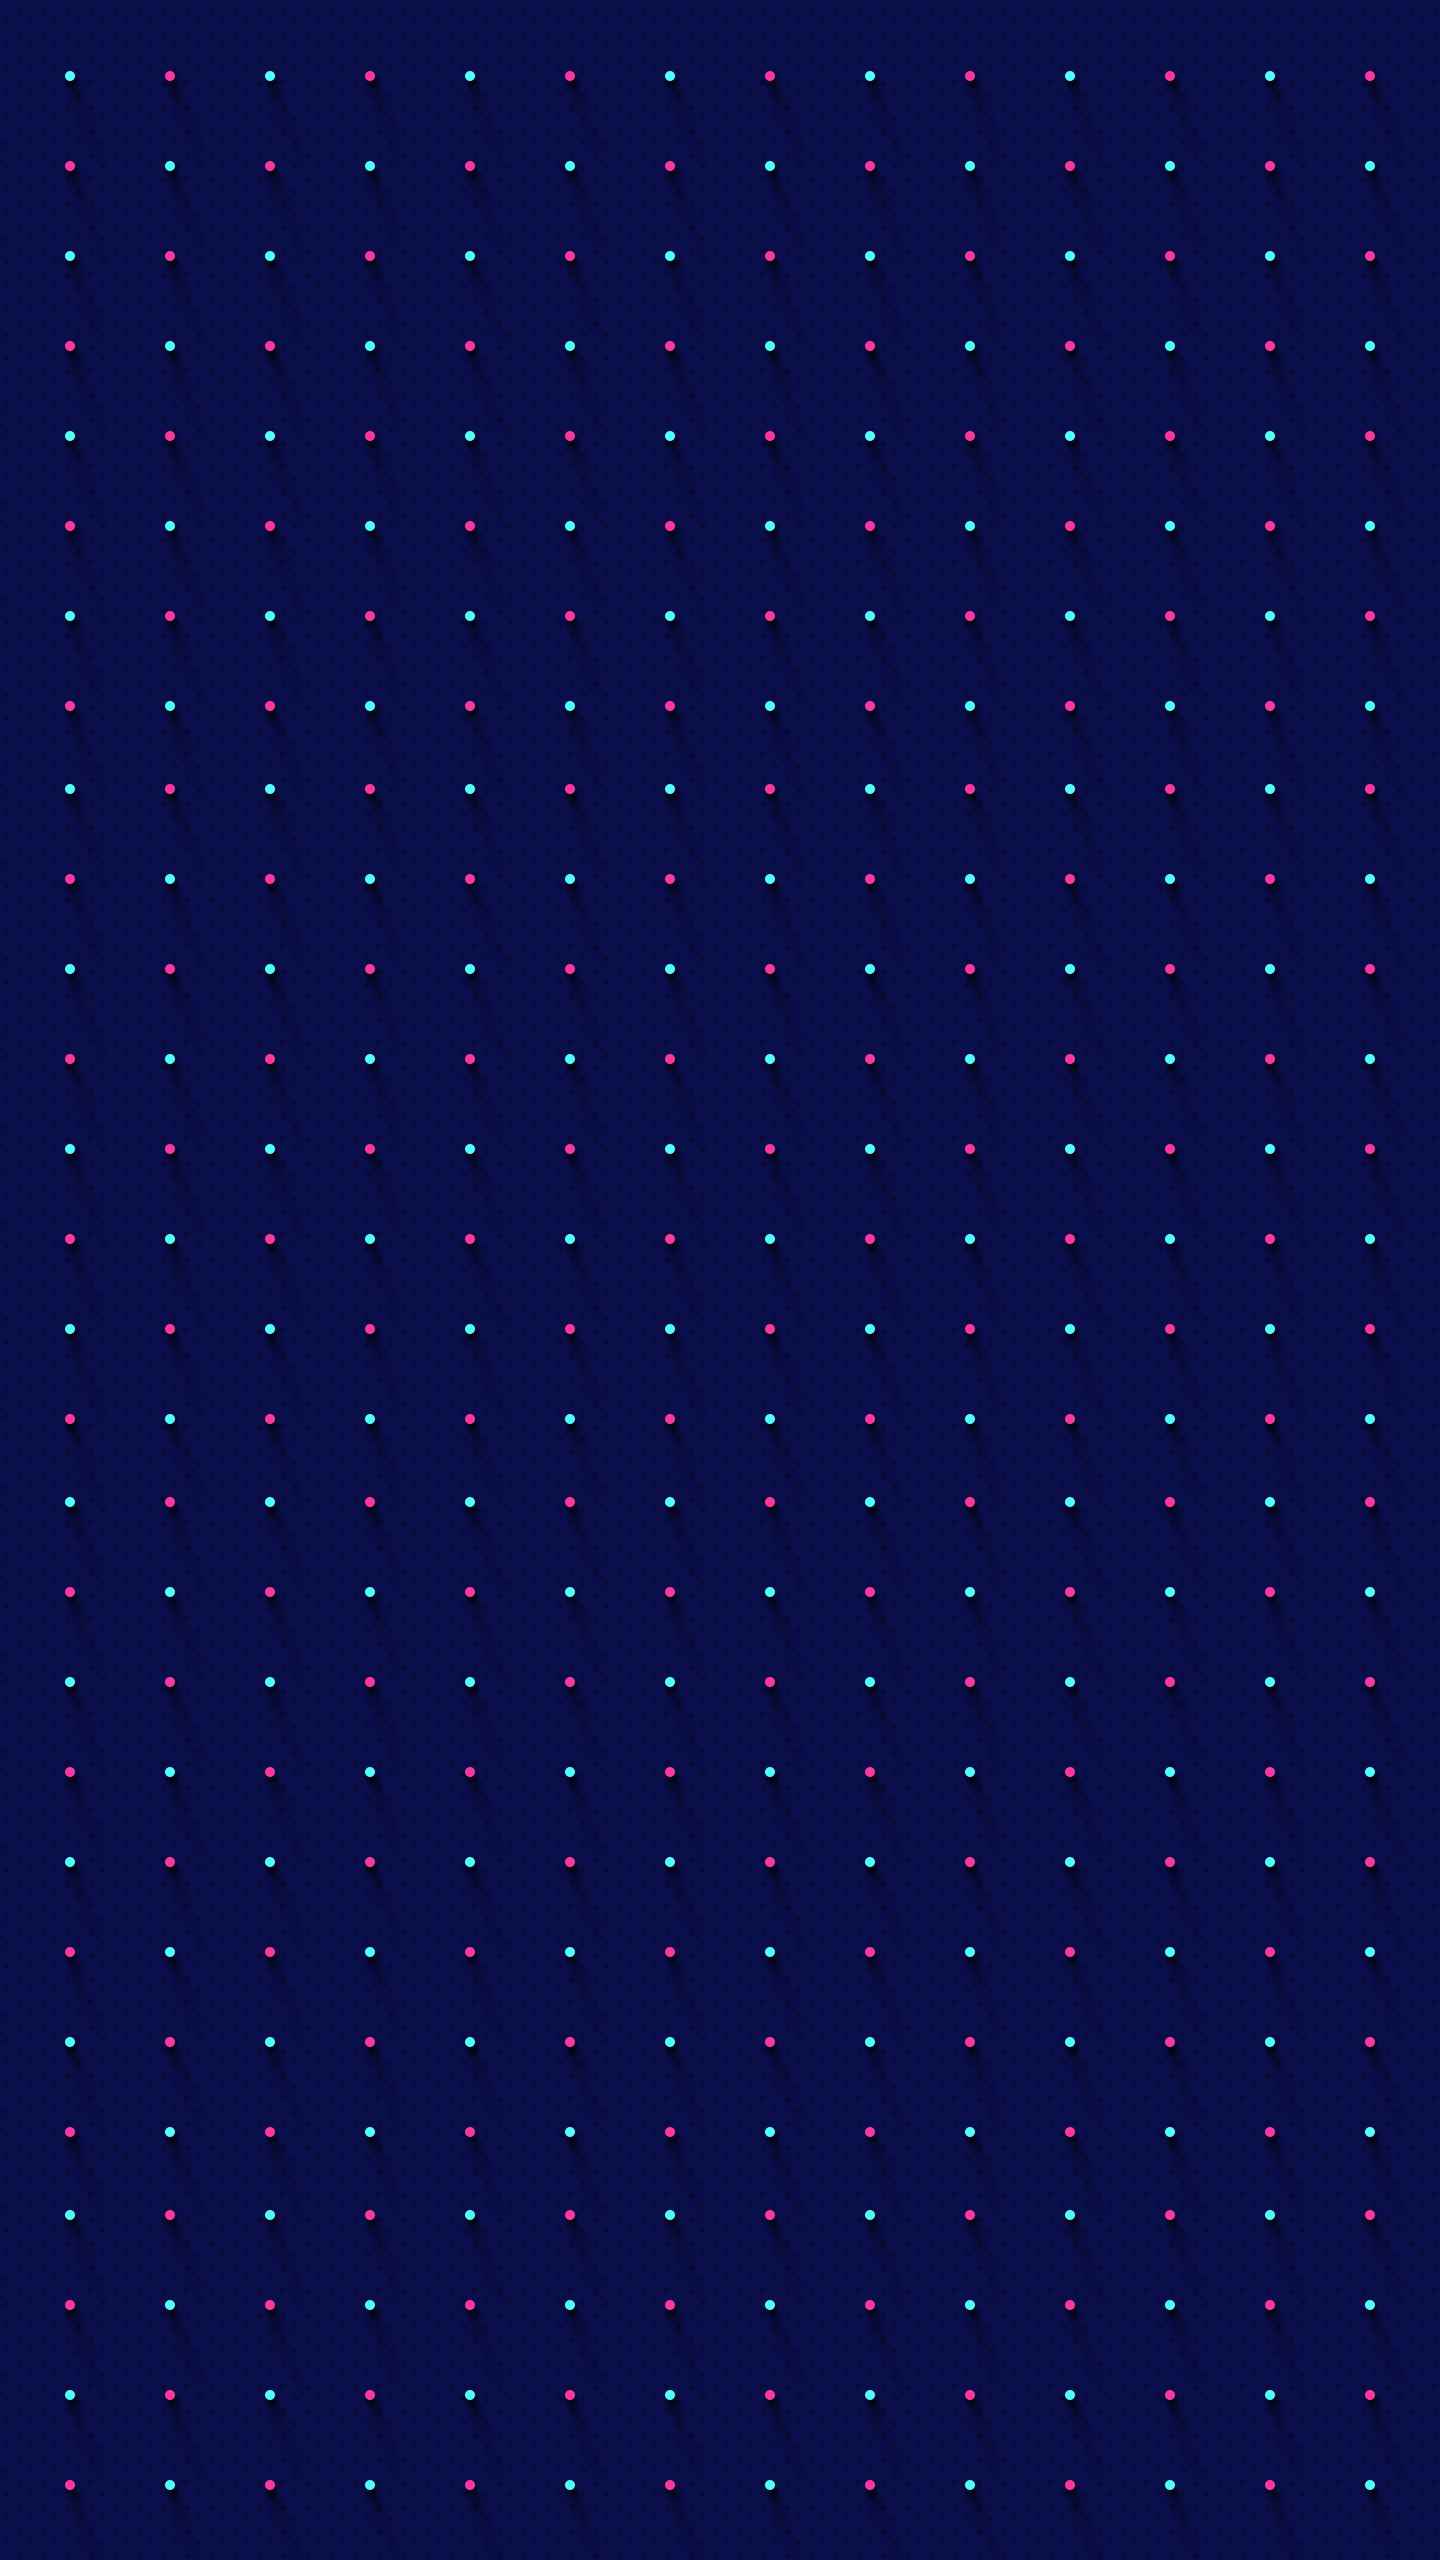 Illusion Dots IPhone Wallpaper - IPhone Wallpapers : iPhone Wallpapers